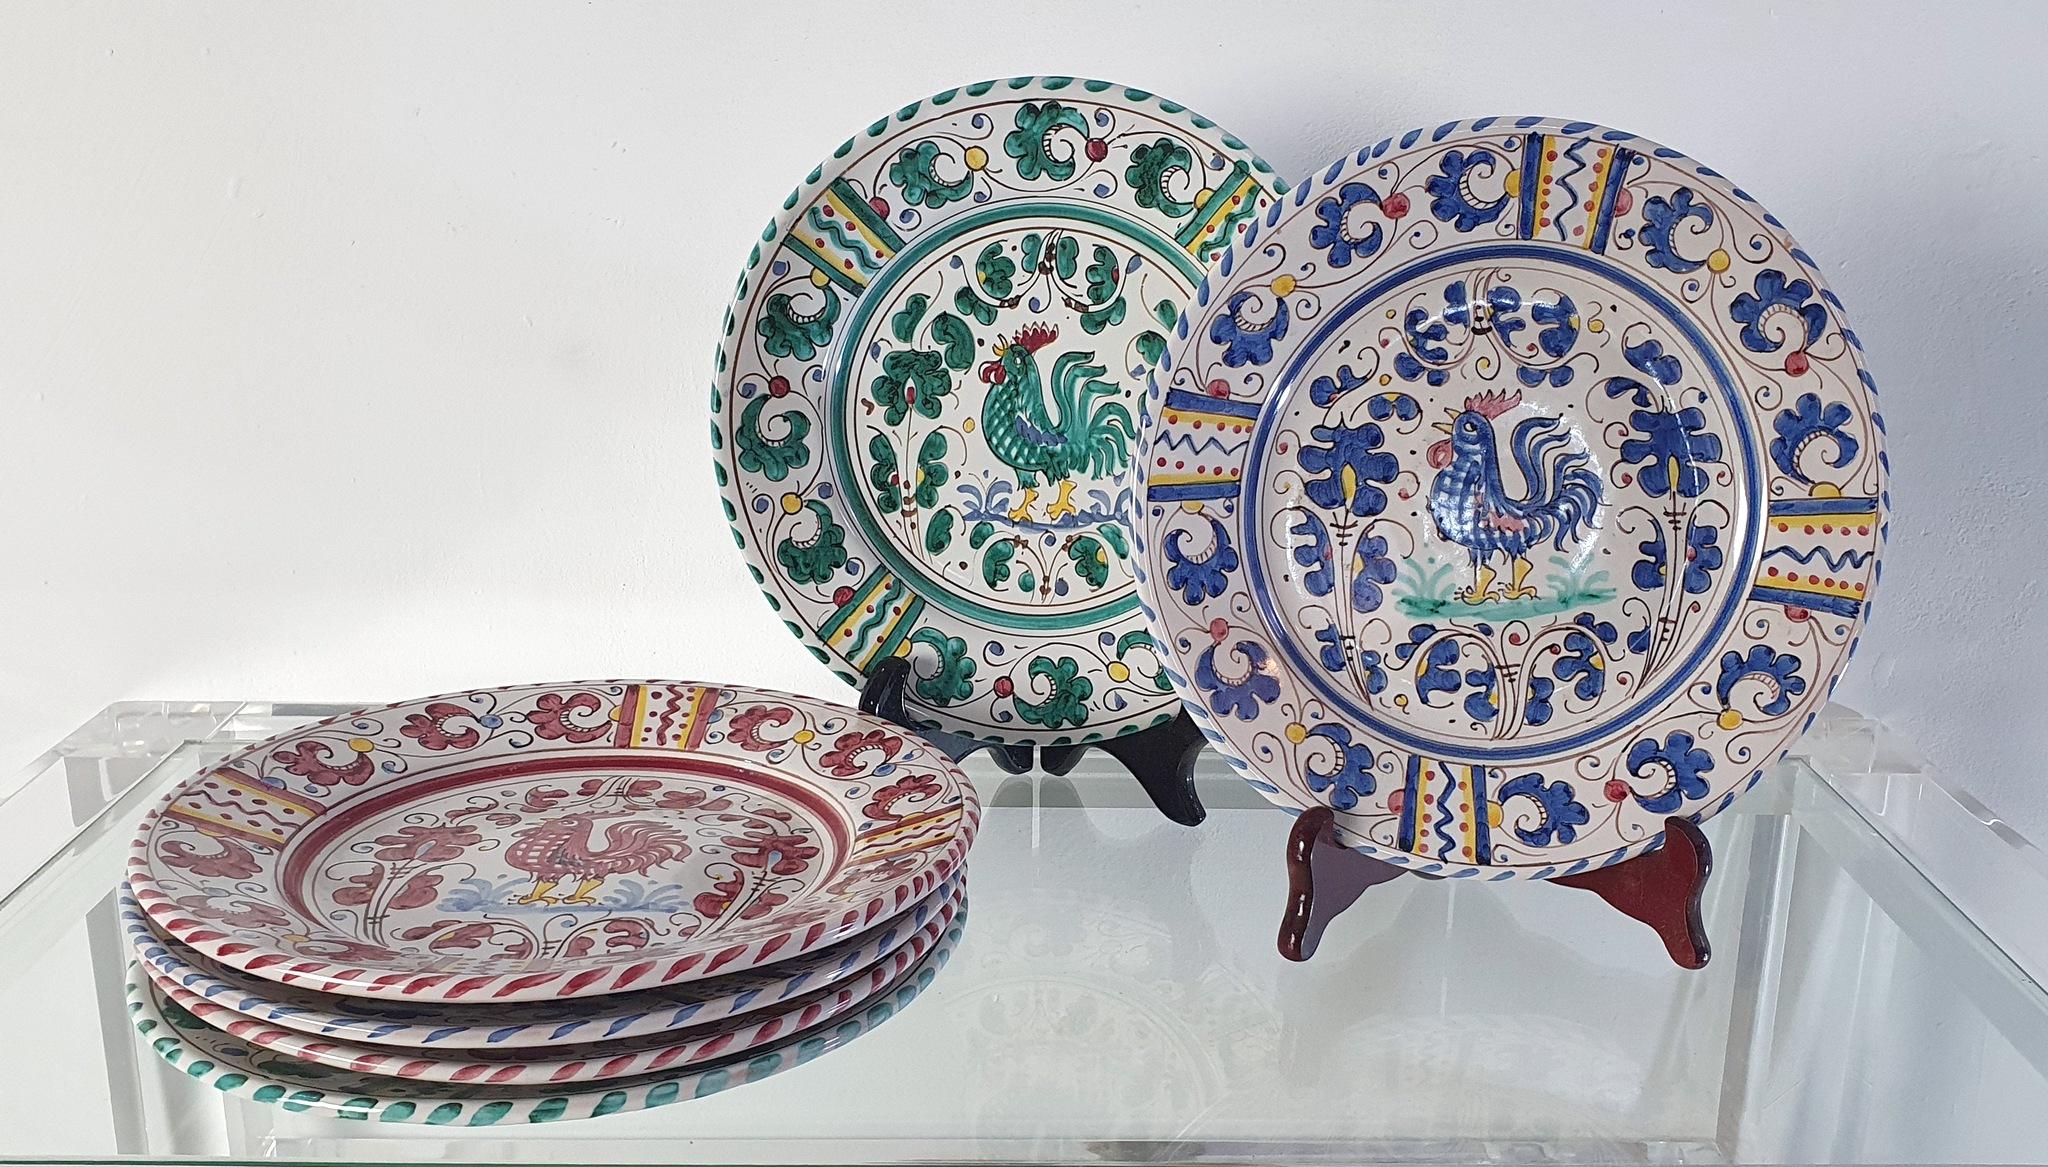 A set of six plates which is in excellent condition without scratching, chipping or cracks. 

The Orvieto (or Orvietano) design is a very old and traditional pattern that originated during the Renaissance in the hill-top town of Orvieto –